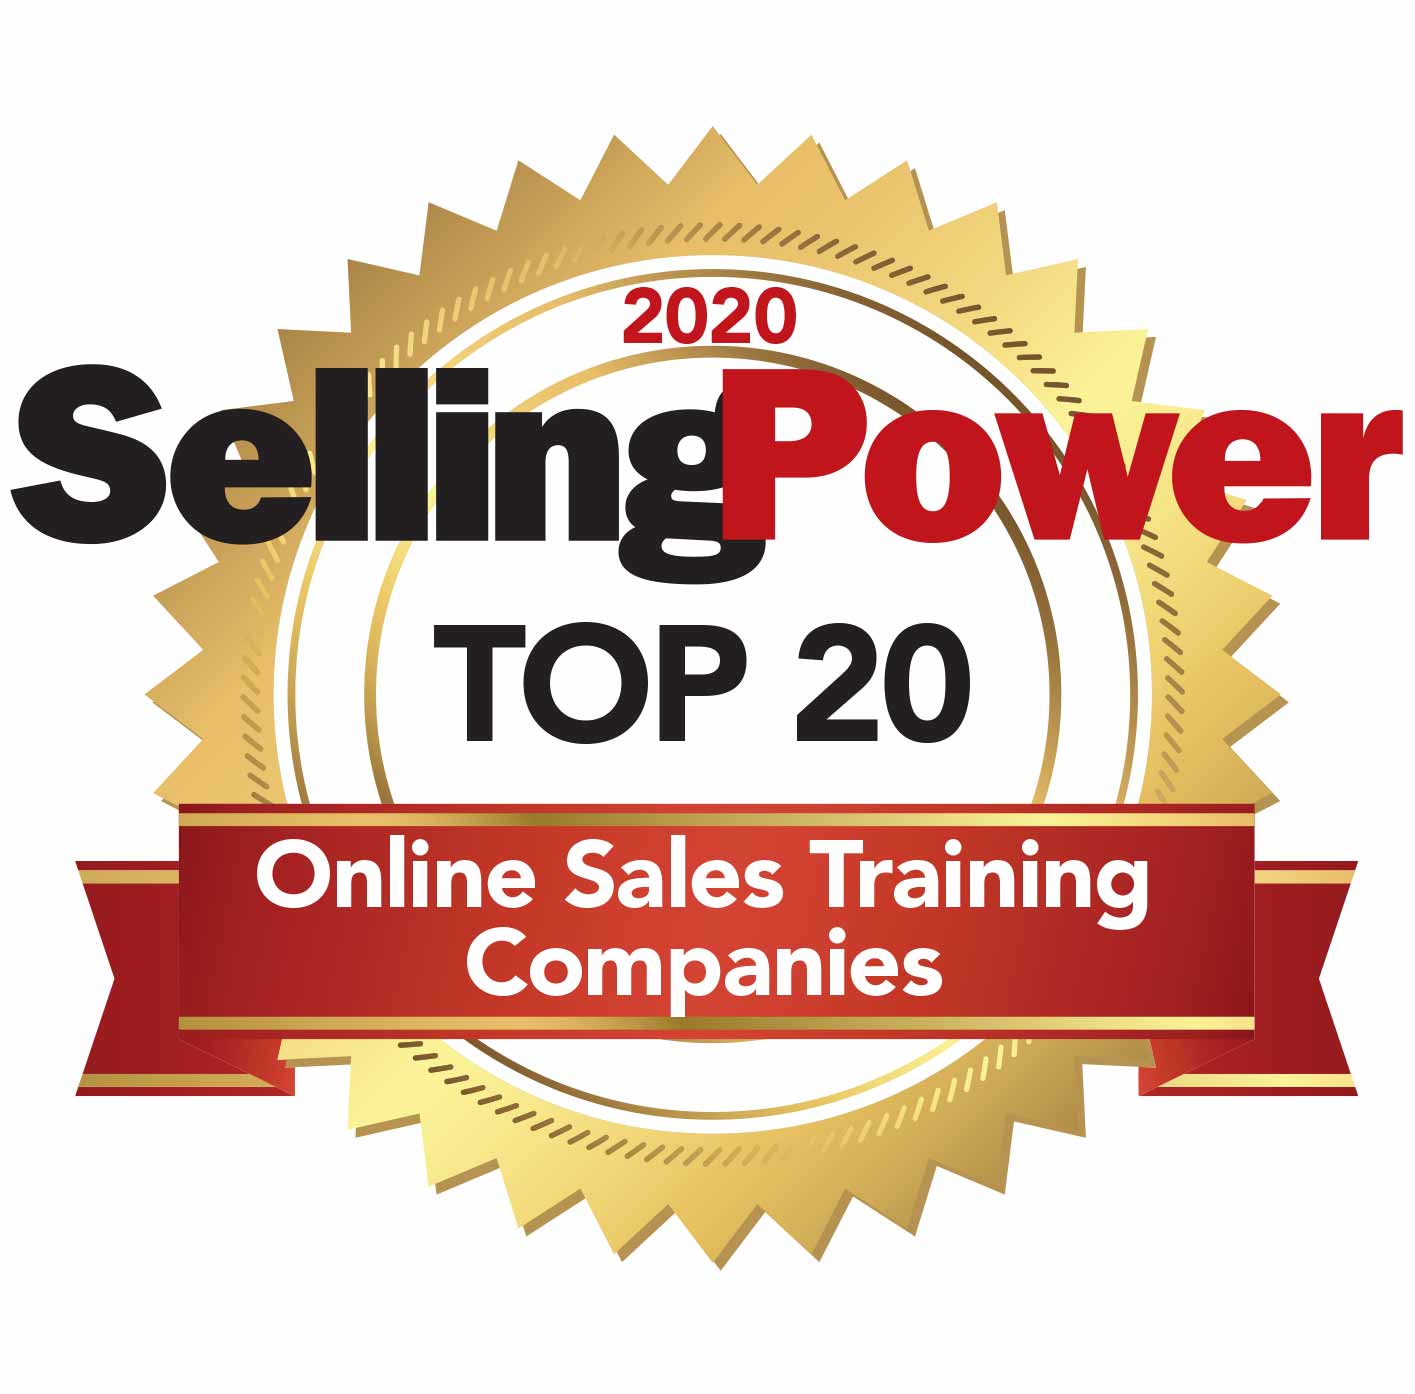 Logo for the Selling Power Top Virtual Sales Training Companies in 2020